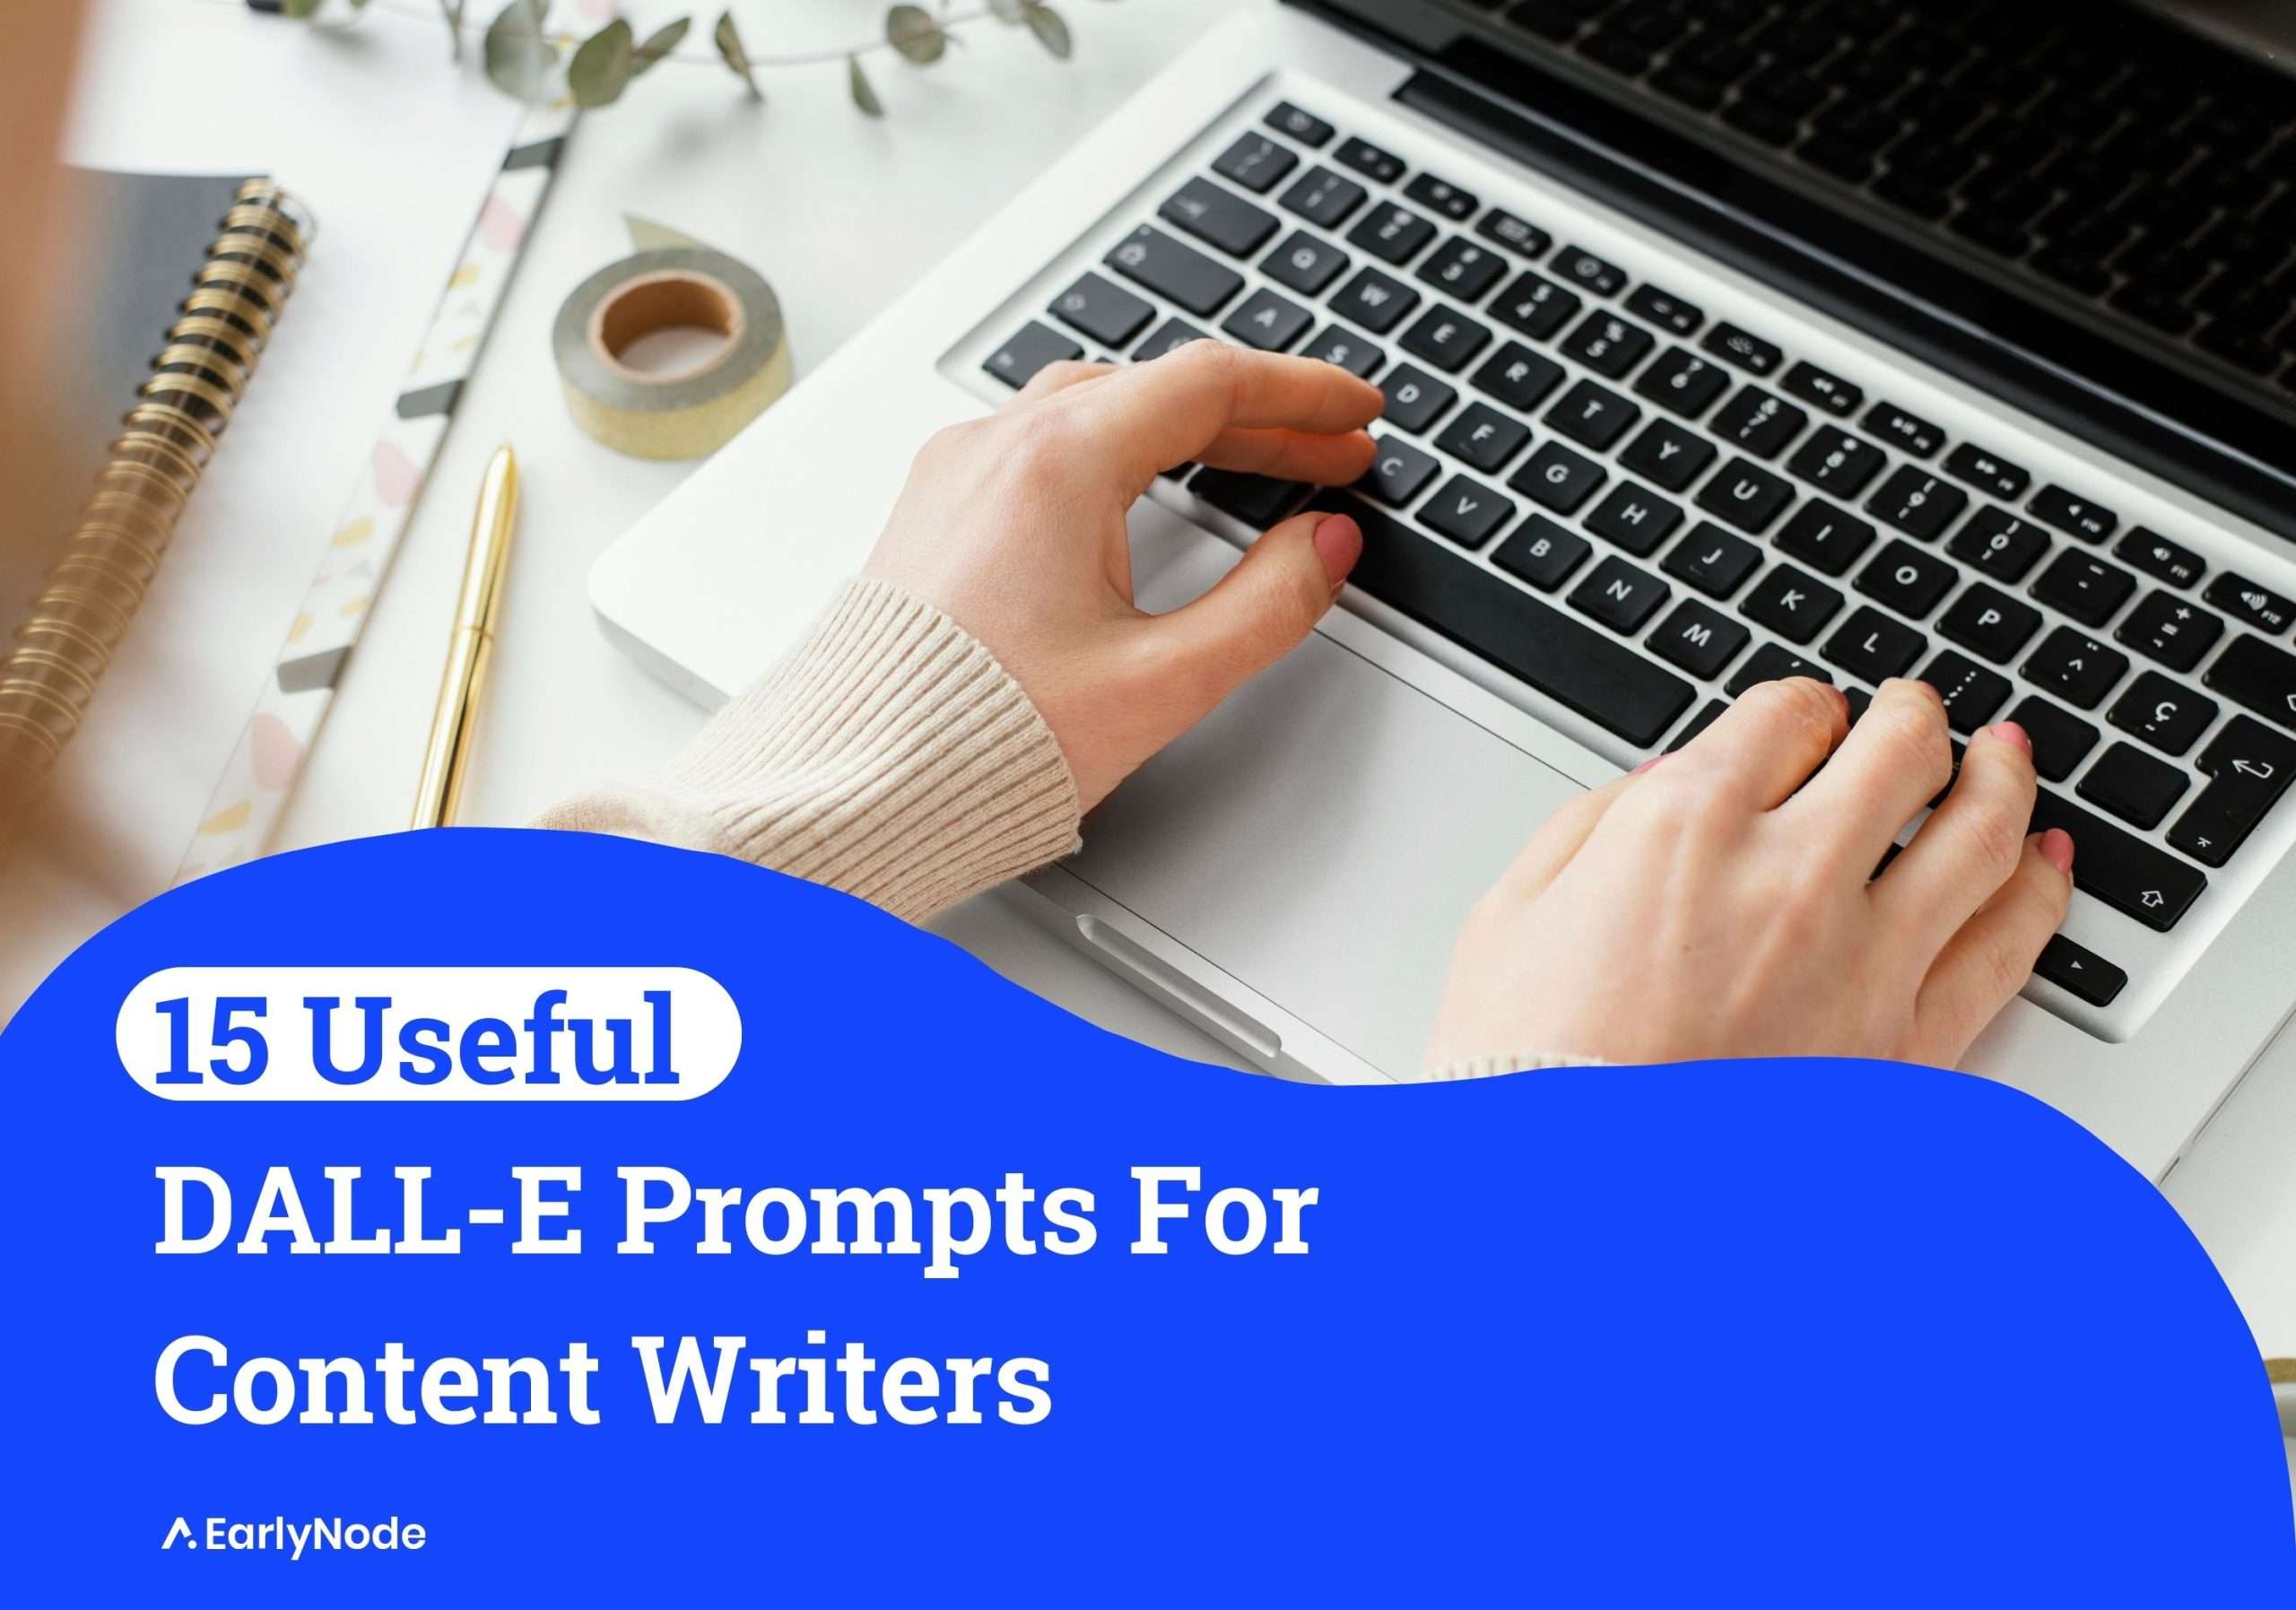 15+ Powerful DALL-E Prompts for Content Writers